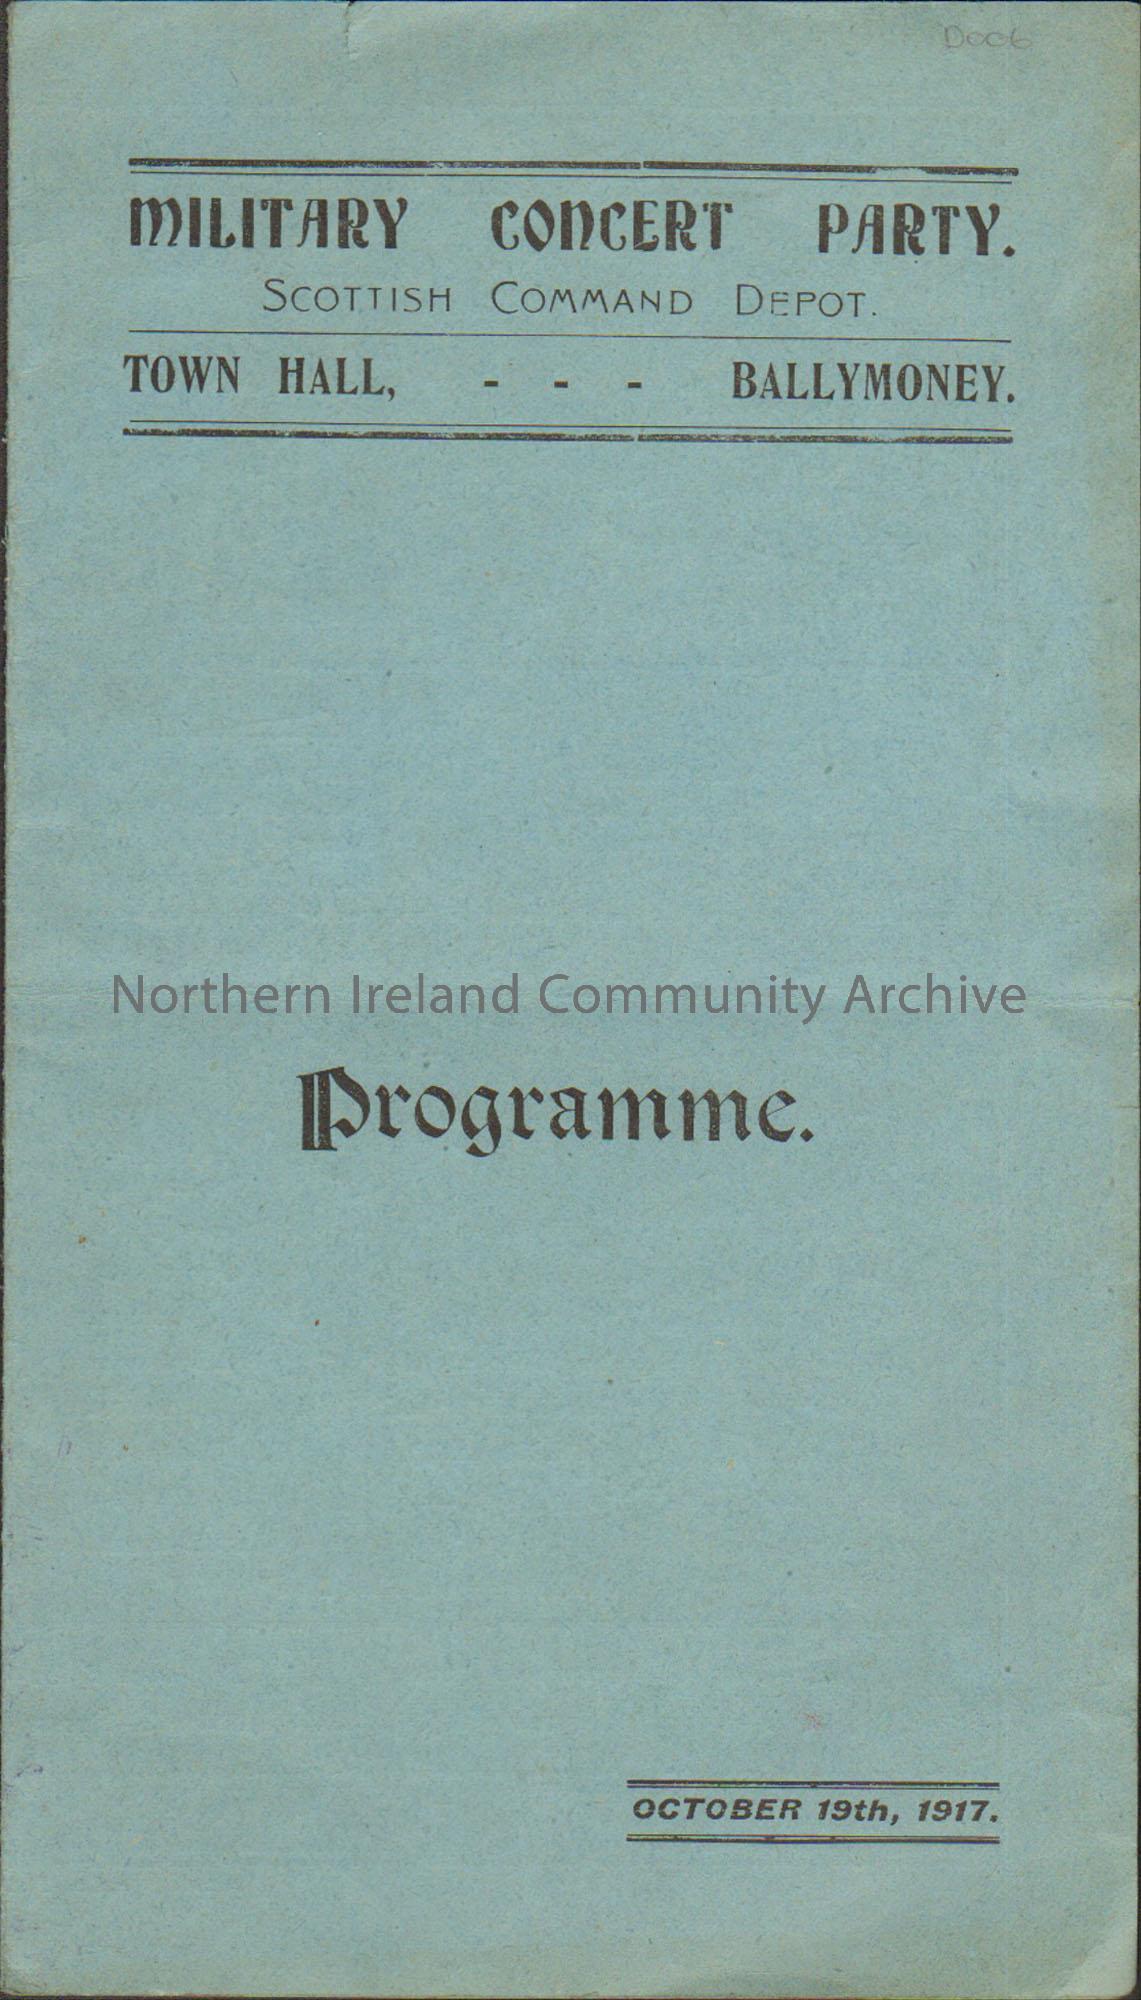 Blue programme for Scottish Command Depot Military Concert Party